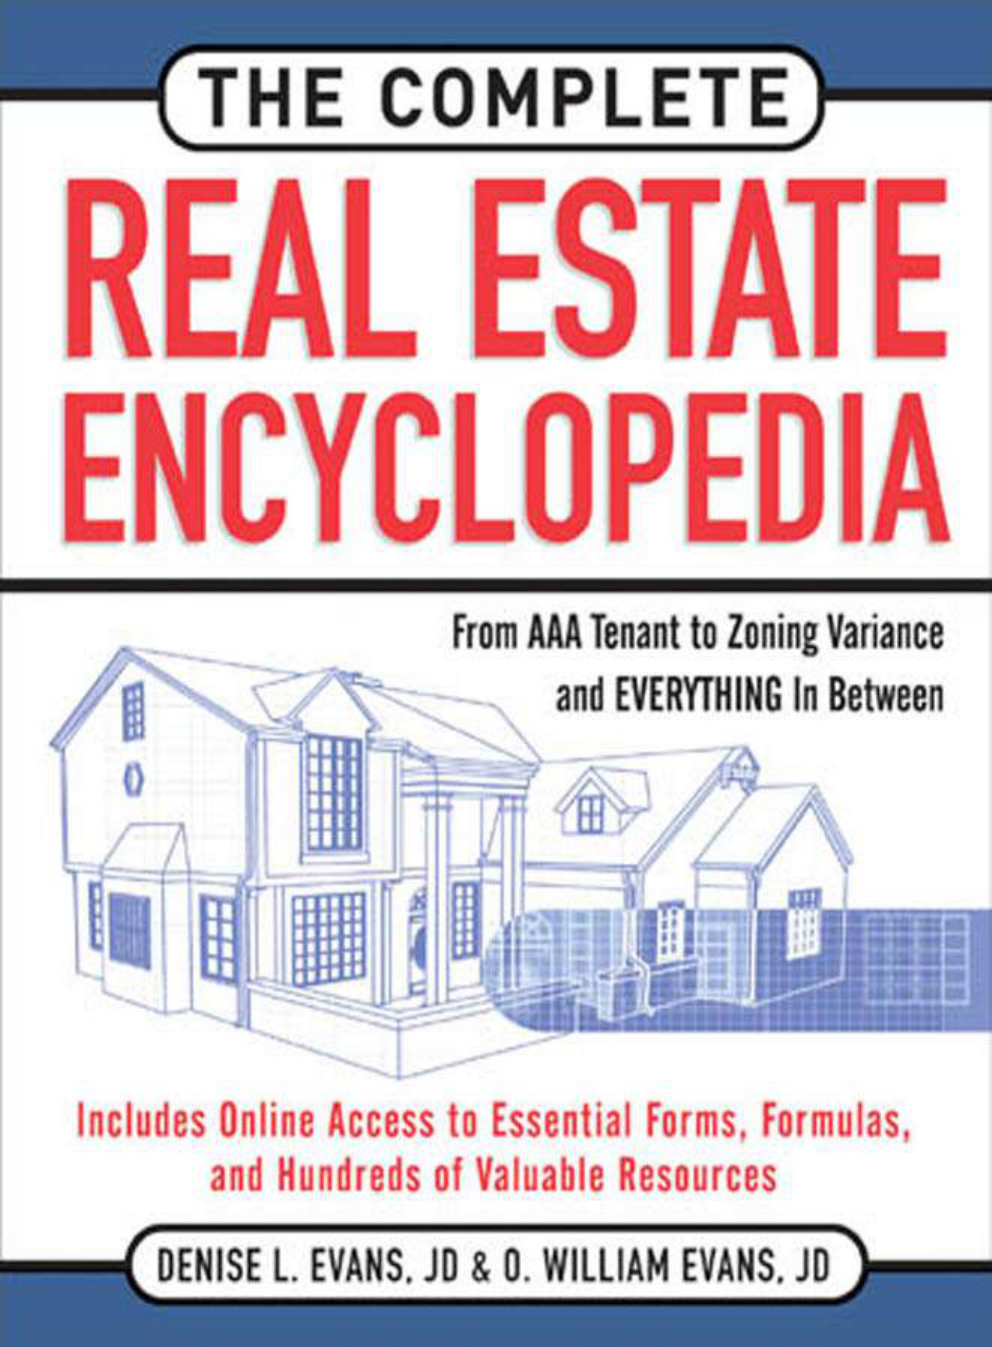 The Complete Real Estate Encyclopedia